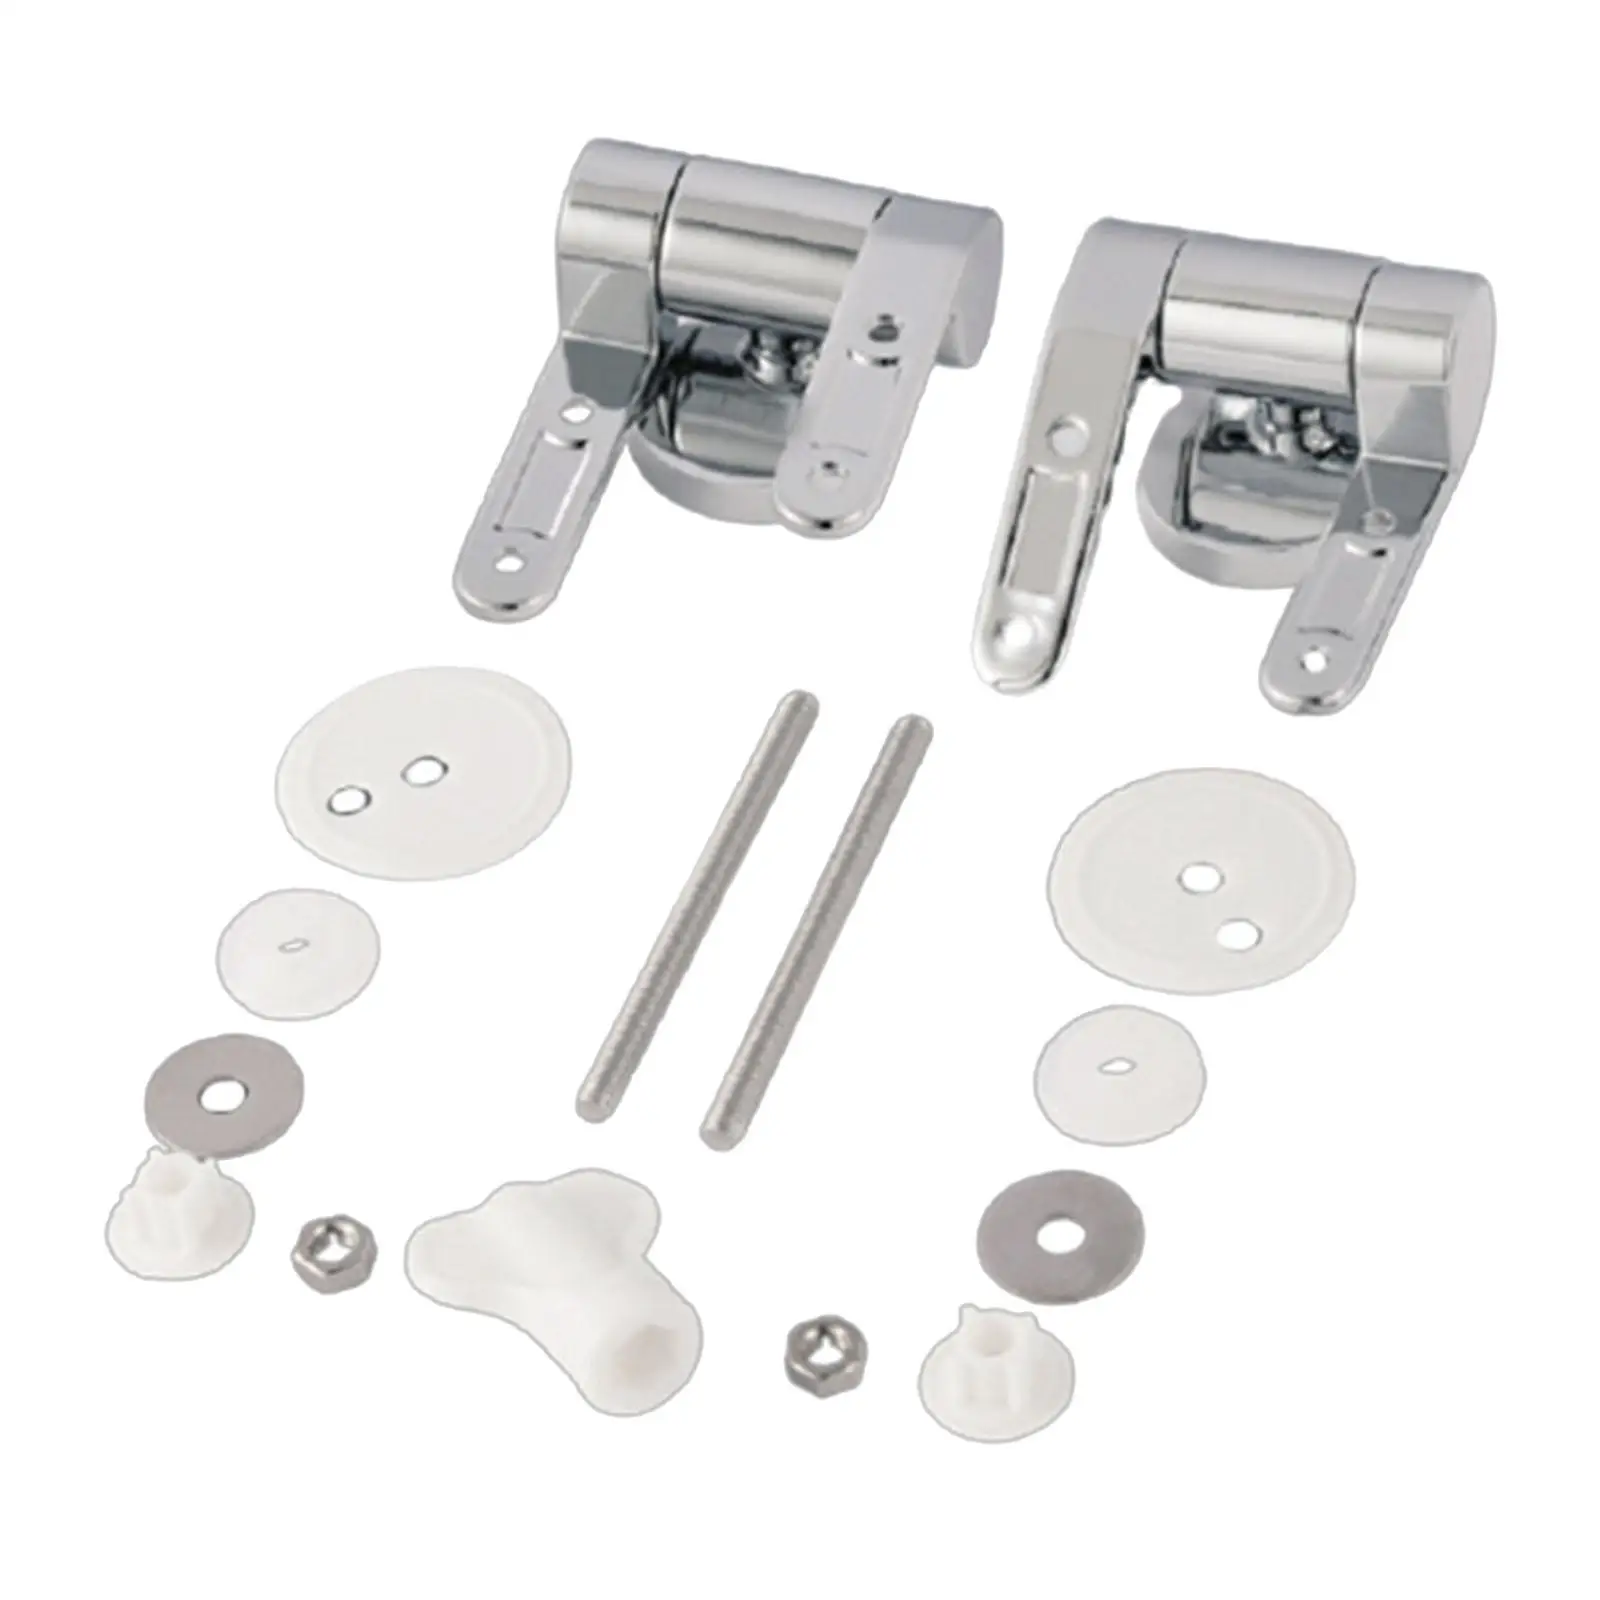 Toilet Seat Hinge Mountings Fixtures Accessories Fixing Bracket for Toilet Lids Washing Machine Bath Telescopic Rice Cooker Lids